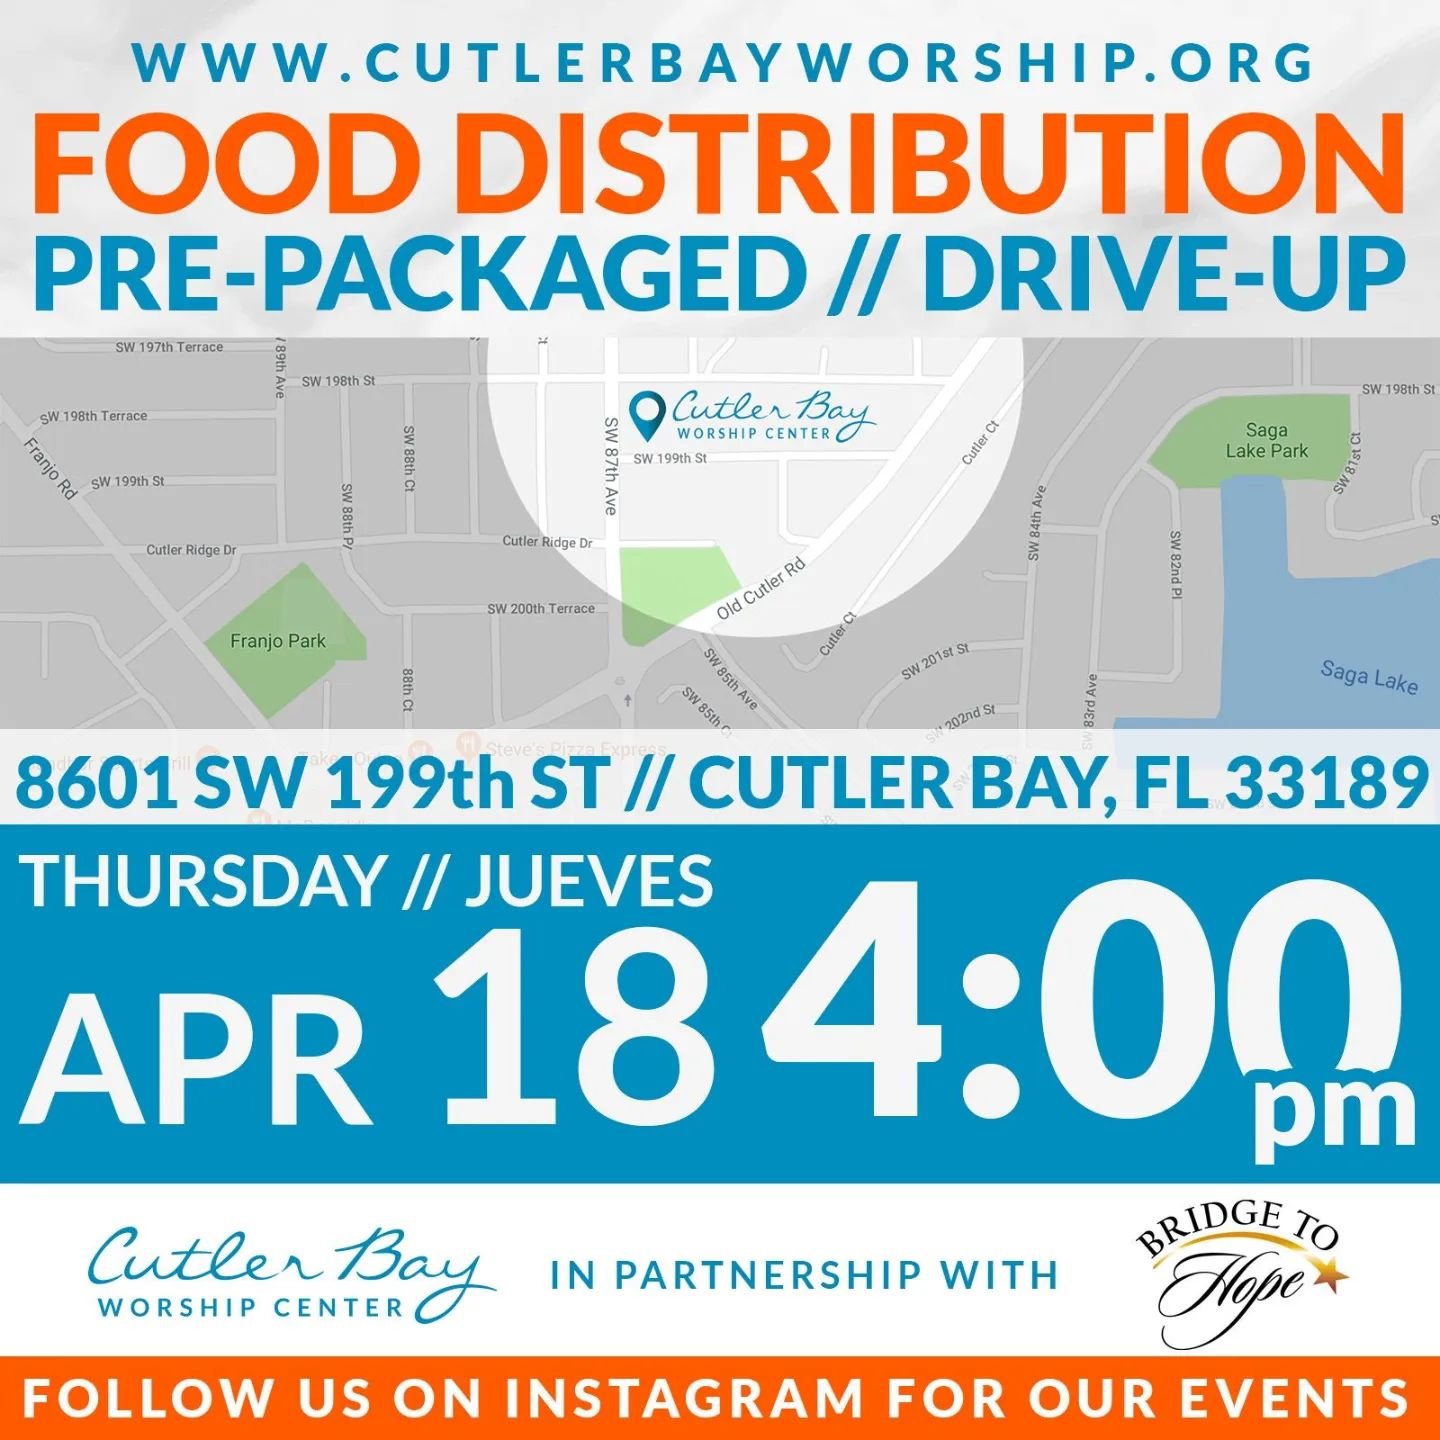 Next food distribution is April 18th! Save the Date! 

We are looking for volunteers to help us package up boxes and distribute the food.  Comment below or send us a DM to be added to the list.  Hard working Junior High &amp; High School students are